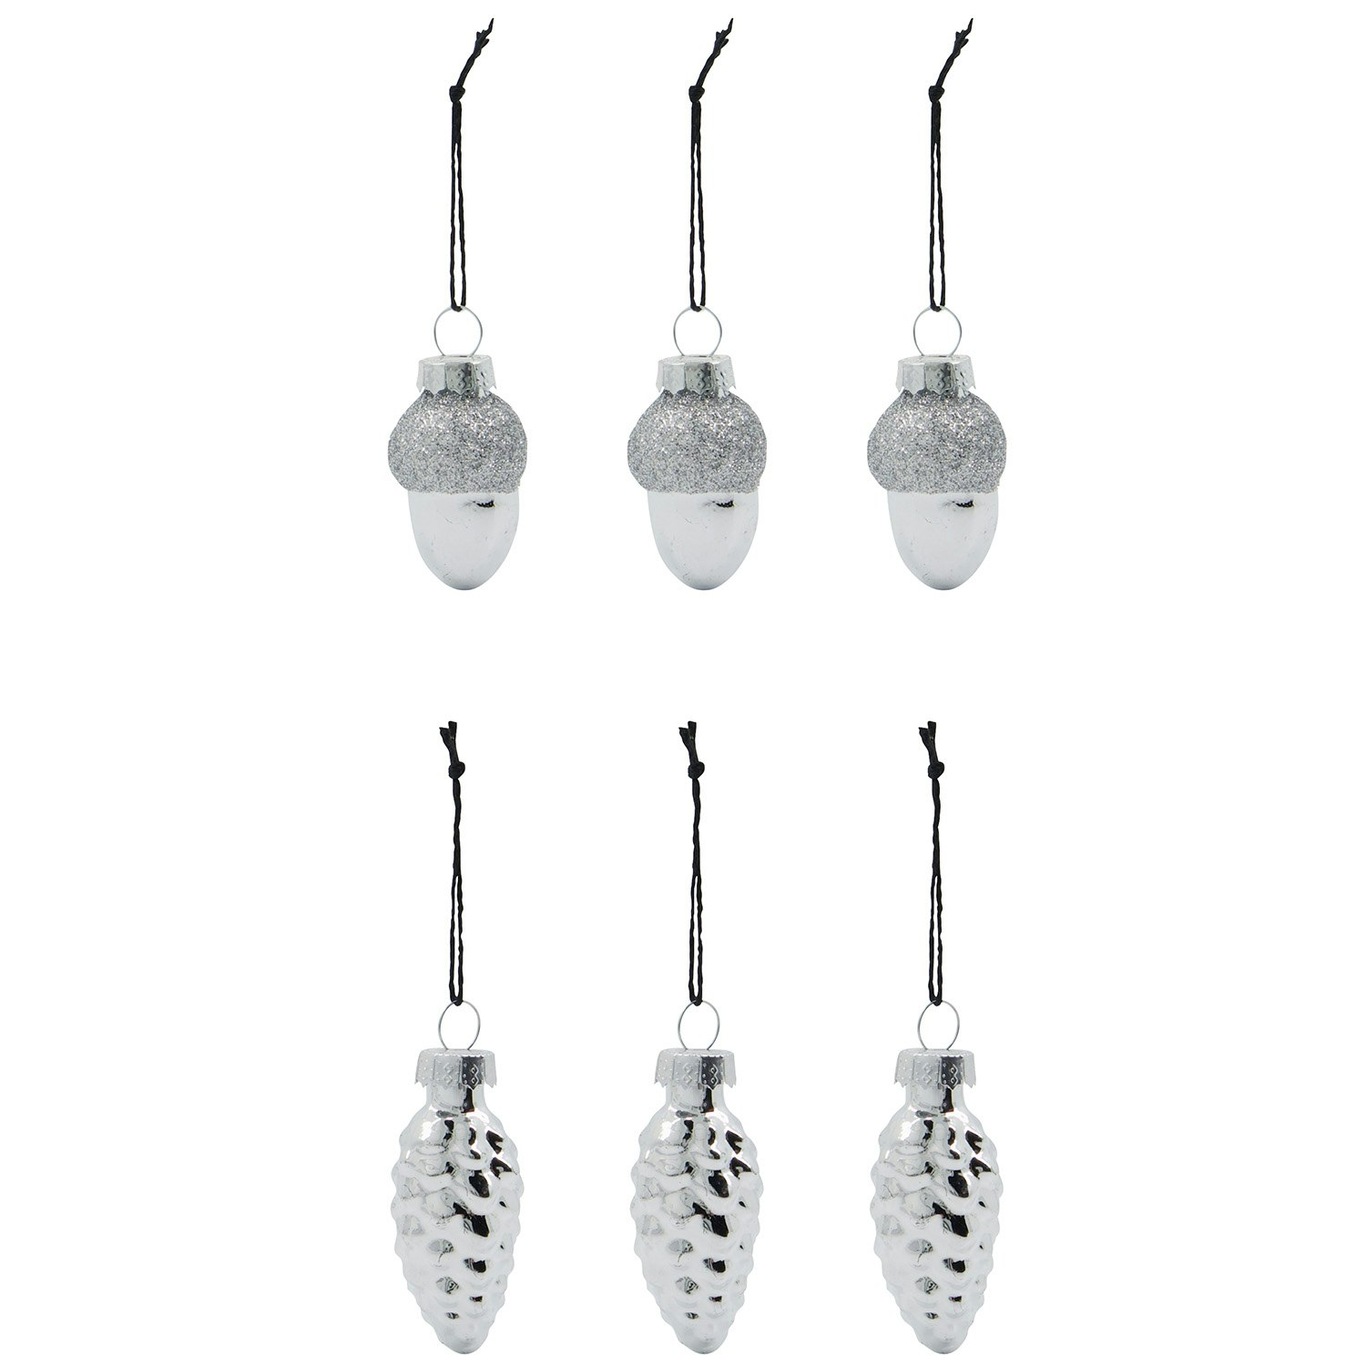 Glint Christmas Decorations 6-pack, Silver